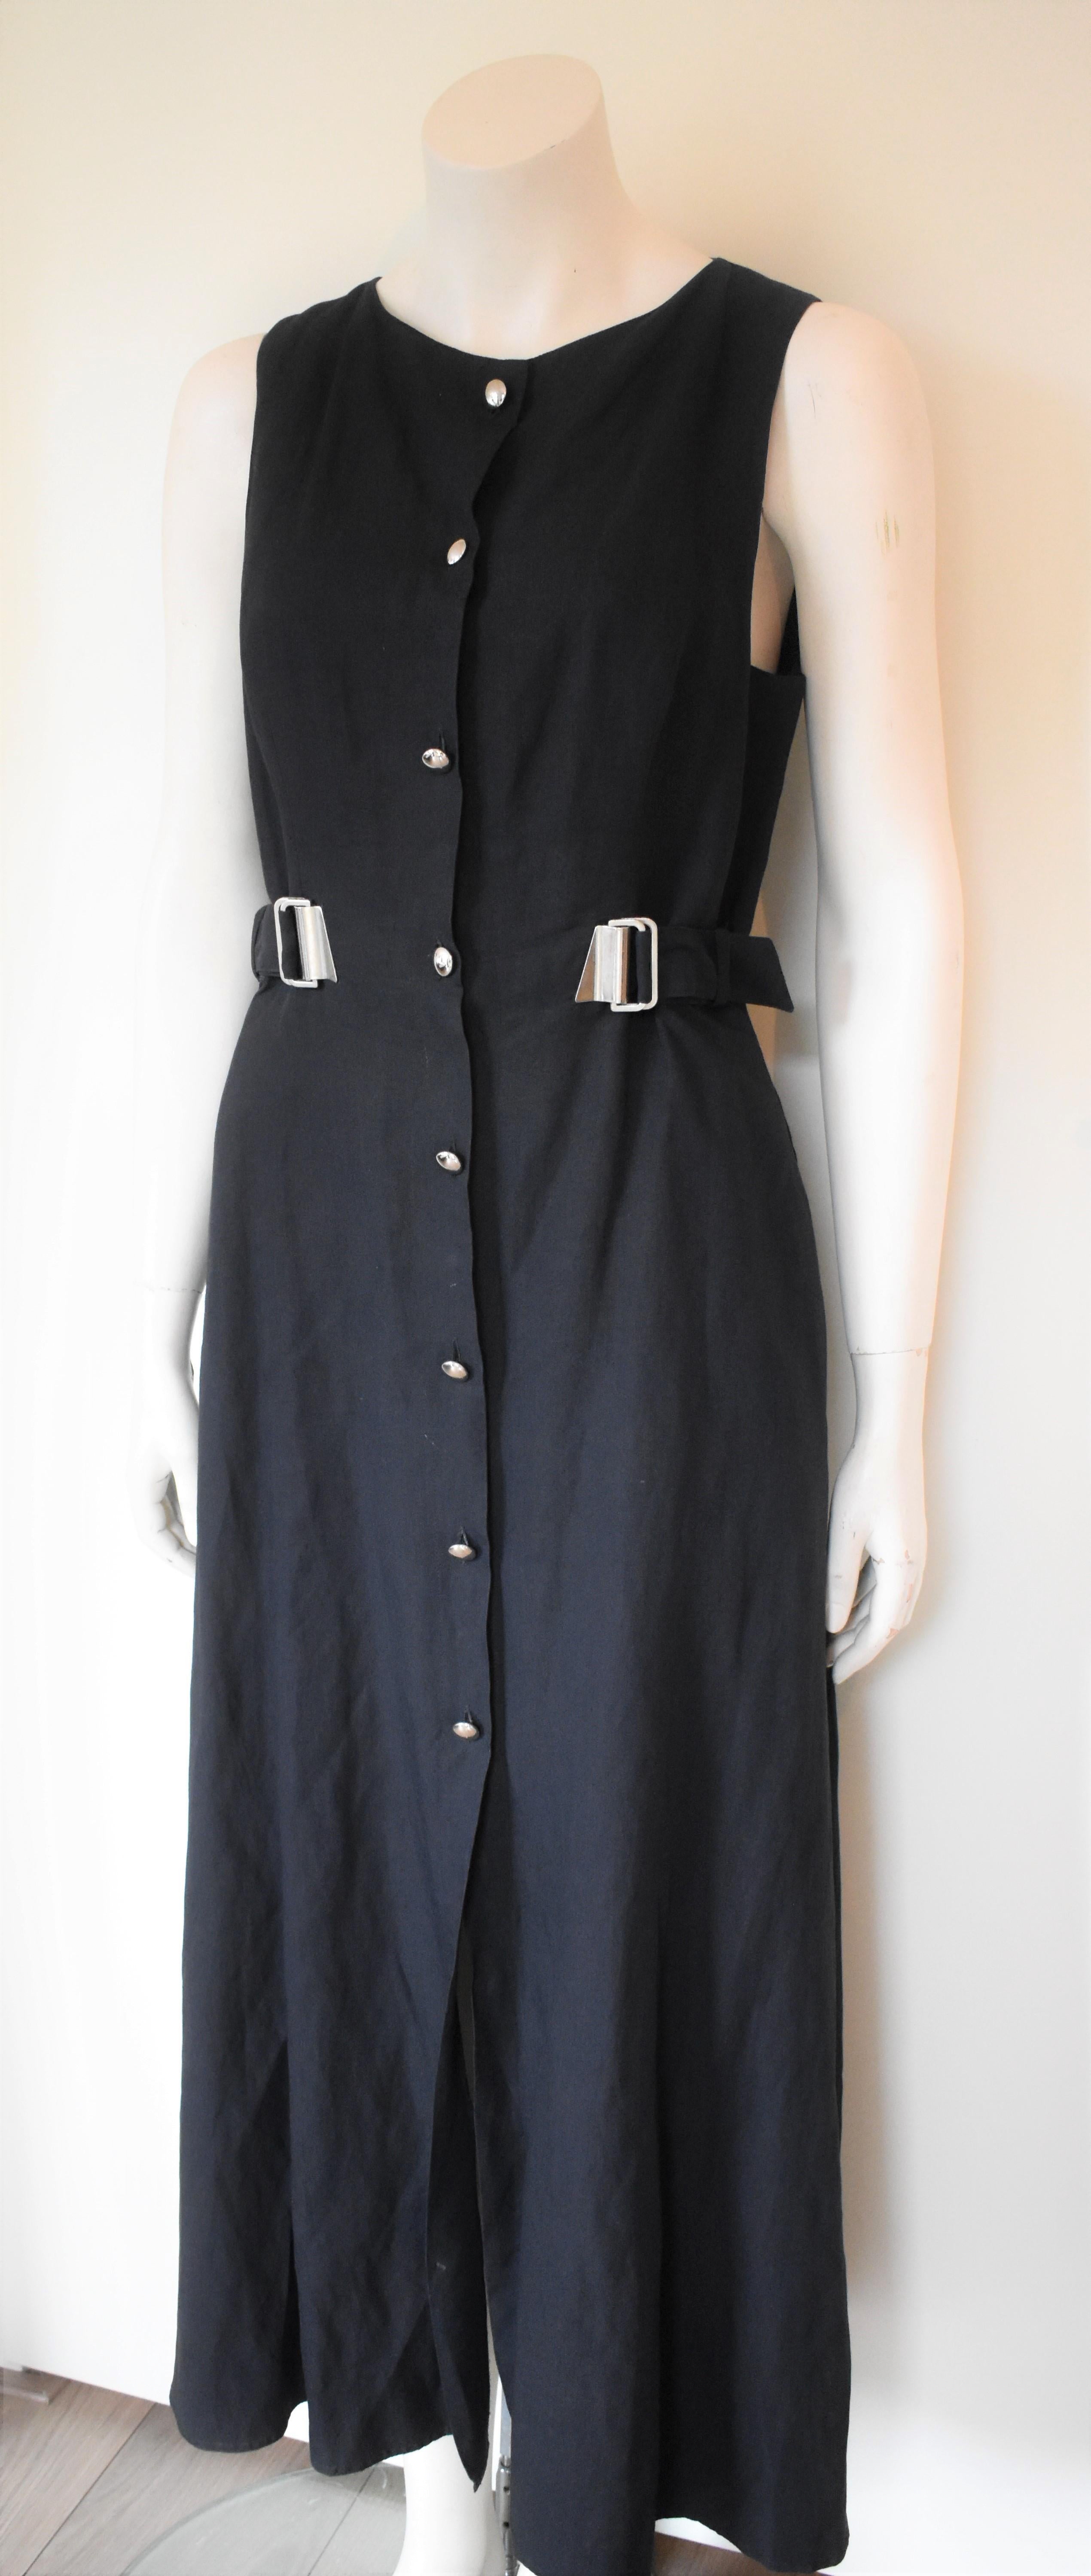 Long black cotton dress by Claude Montana, circa 1990. The dress has, in addition to the silver buttons, secret push buttons to secure it is perfectly closed. The two small buckles can be used to tighten up and accent the waist. Before shipping, the